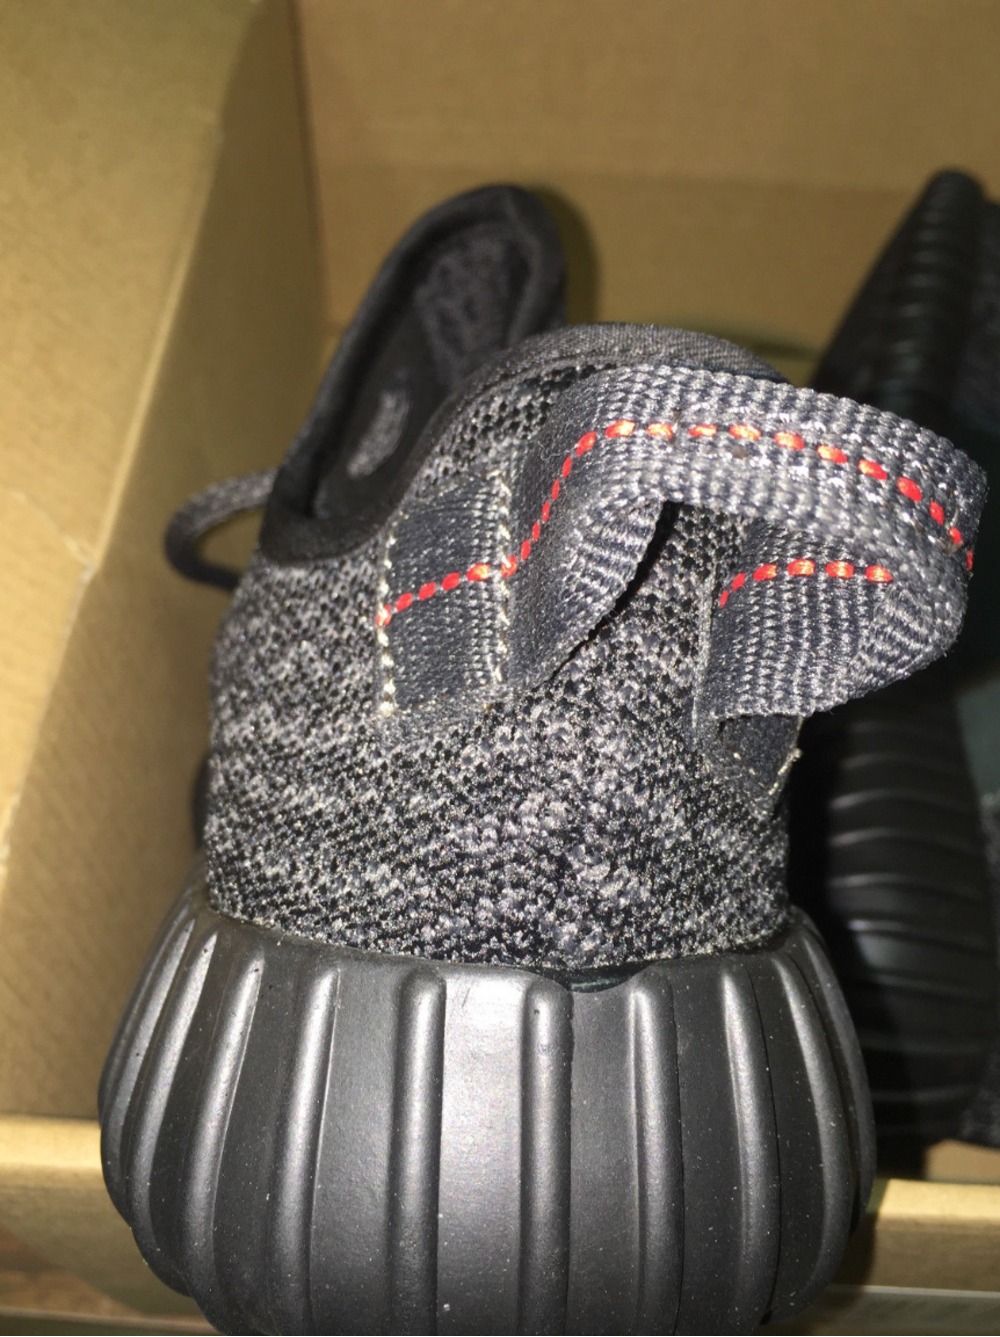 2016 Kanye West Yzy 350 Boost Pirate Black Sneaker 1:1 Quality